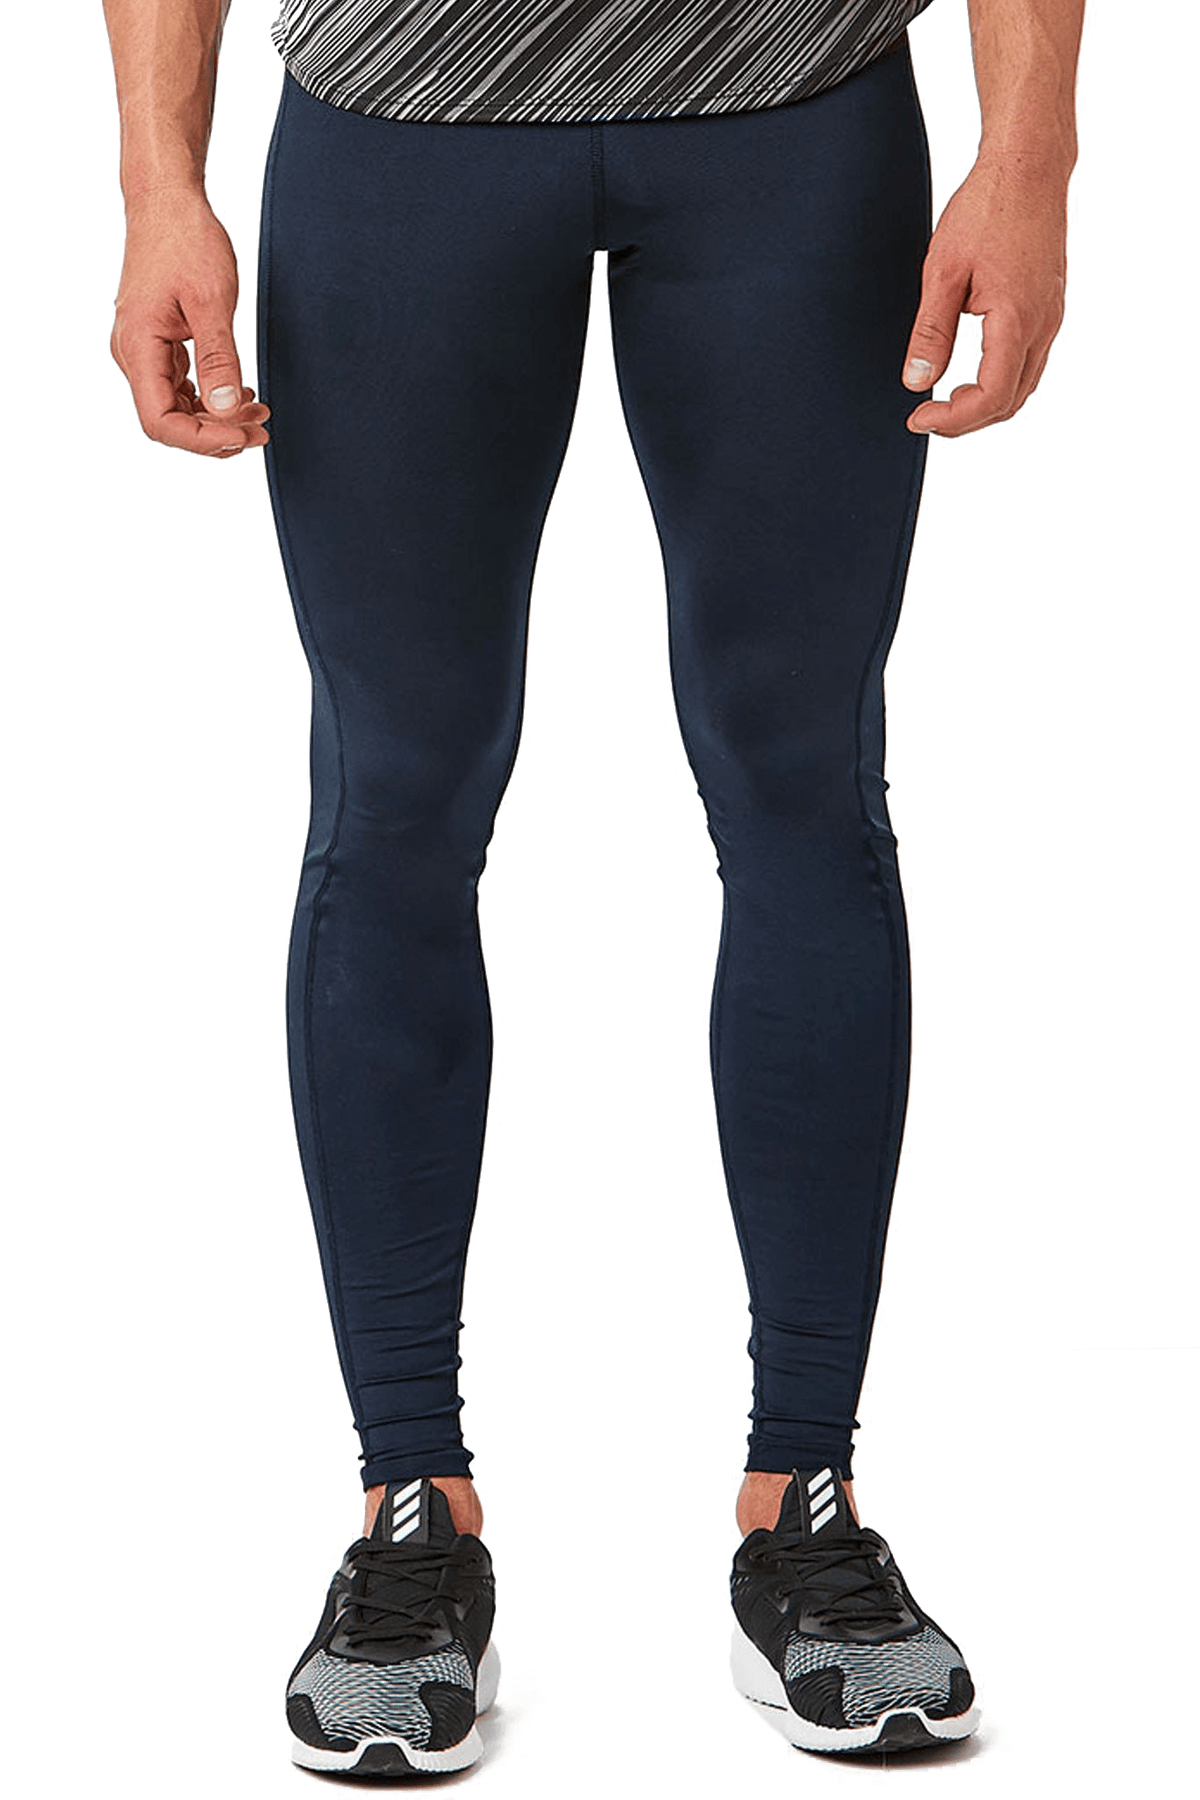 BOATHOUSE Men's Solid Training Tights – Boathouse